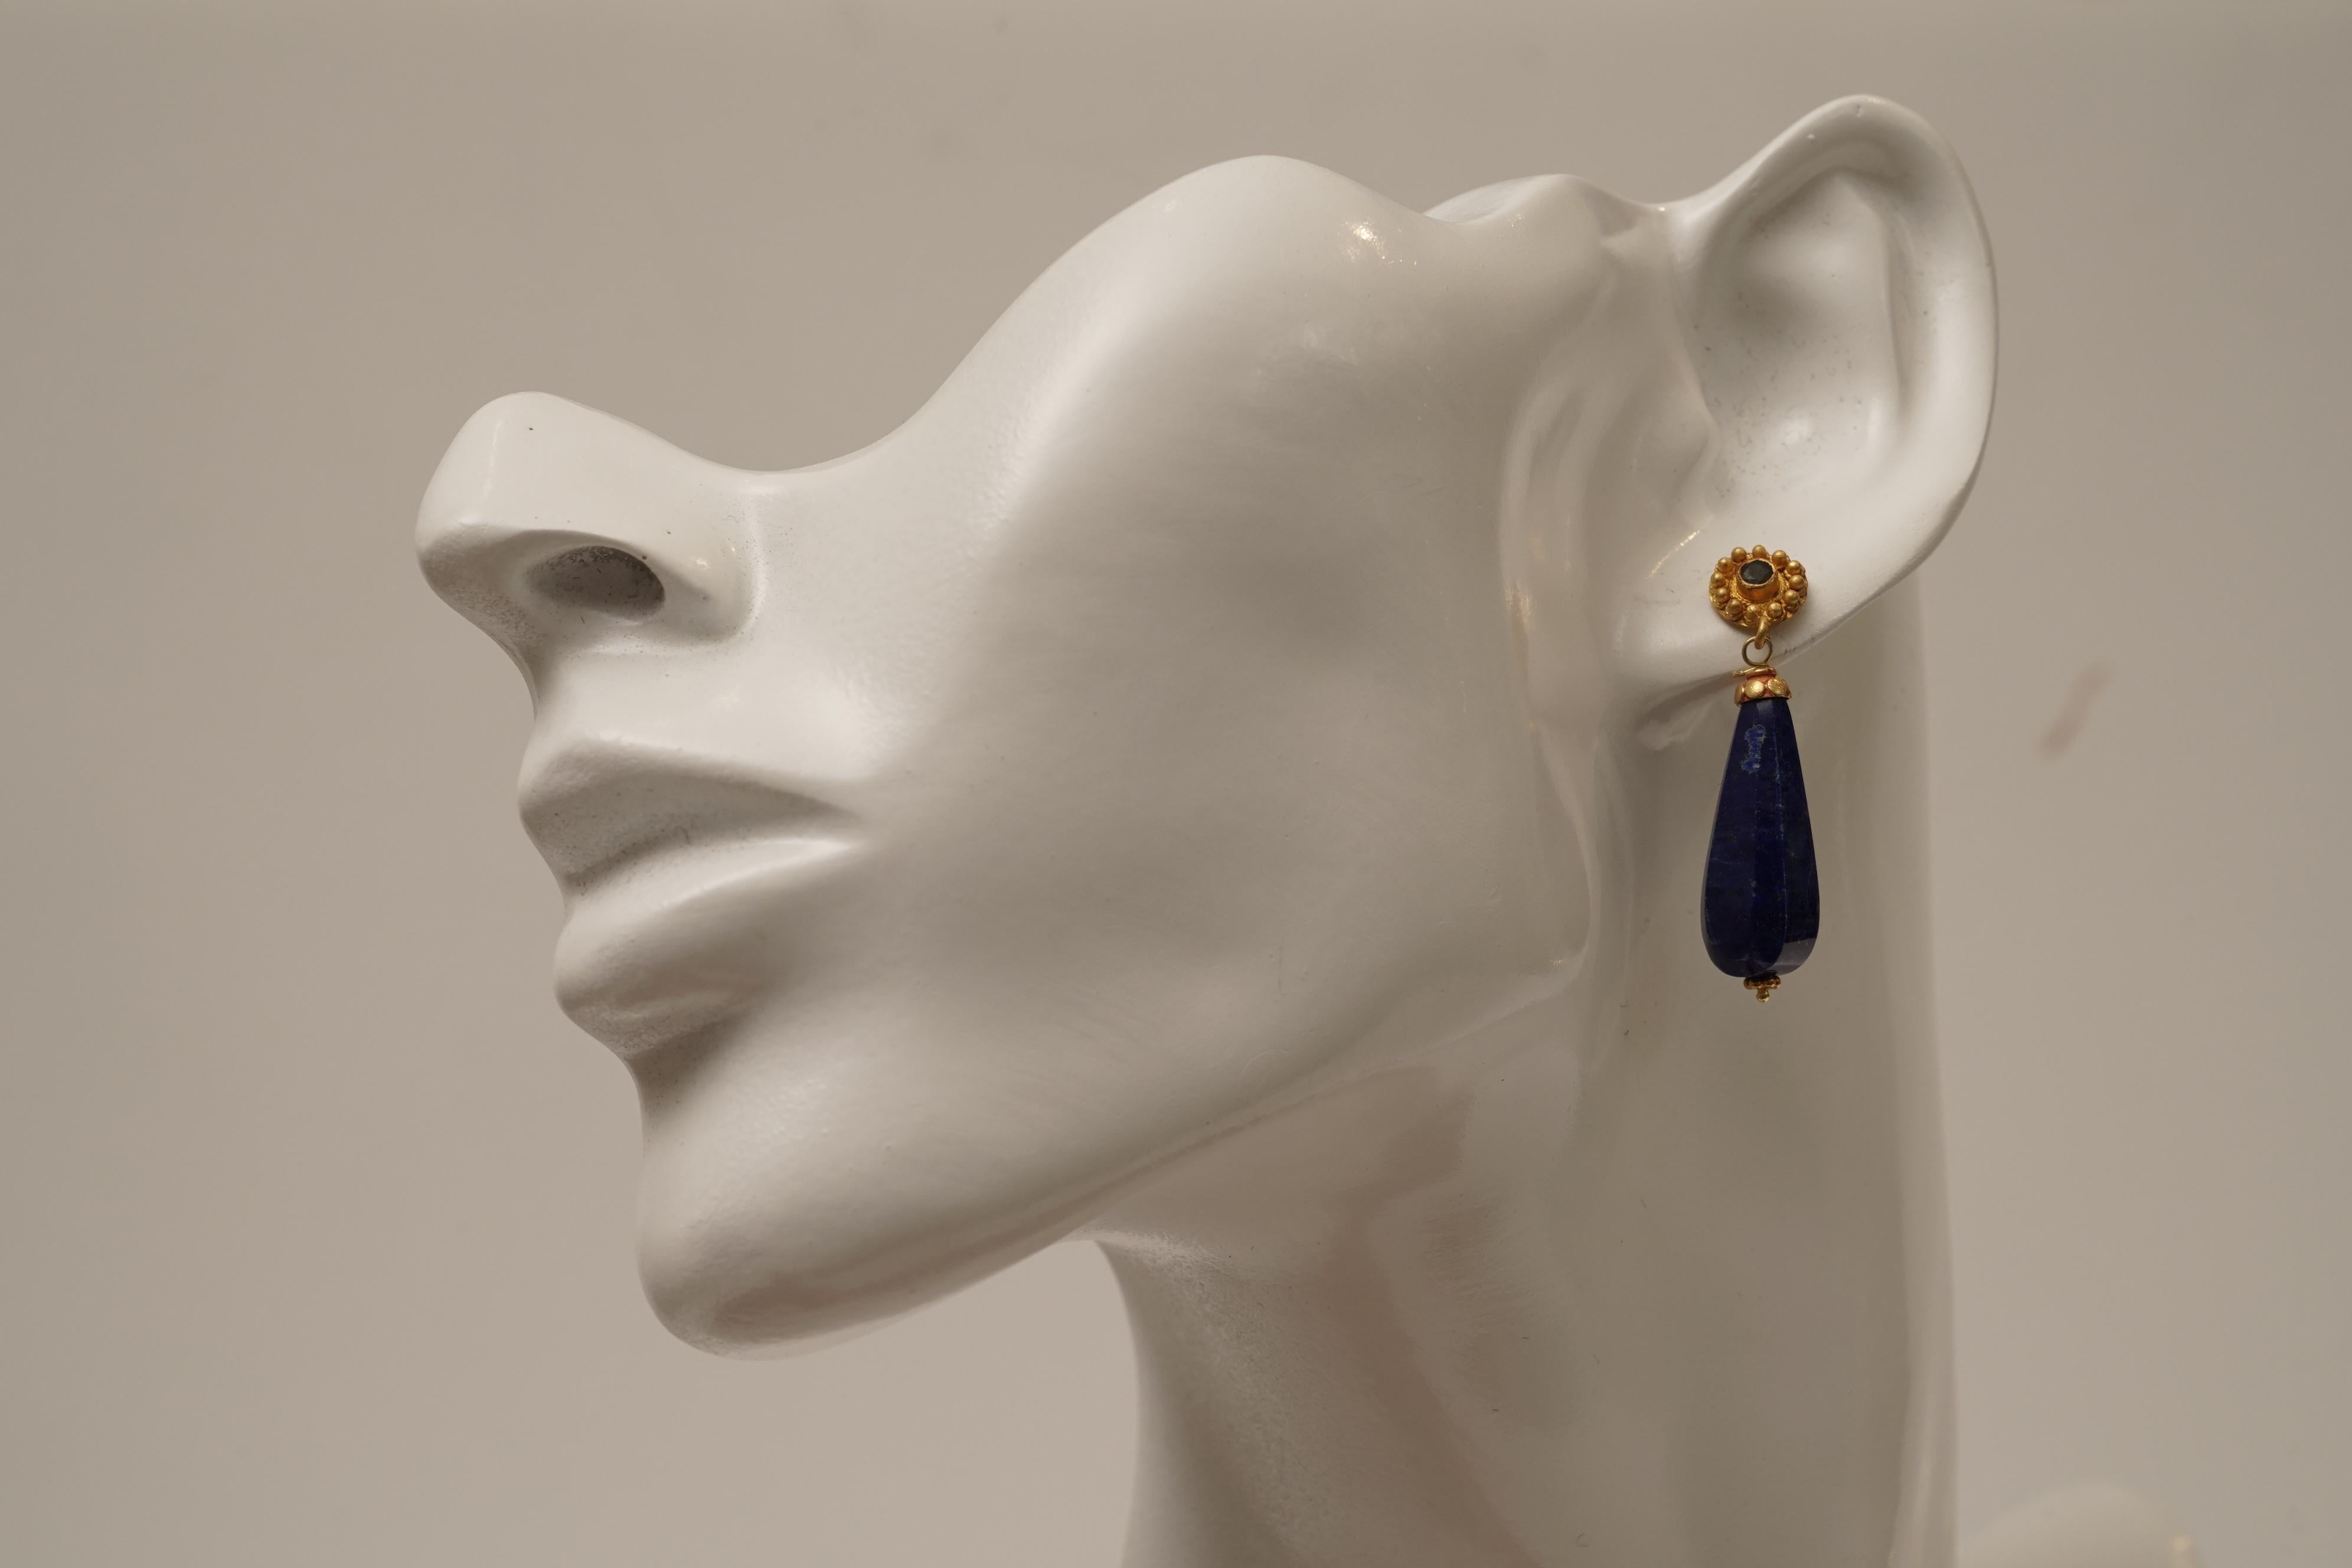 Pear-shaped and beveled natural lapis drop earrings with a 22K gold post and faceted emerald post for pierced ears.  By Deborah Lockhart Phillips